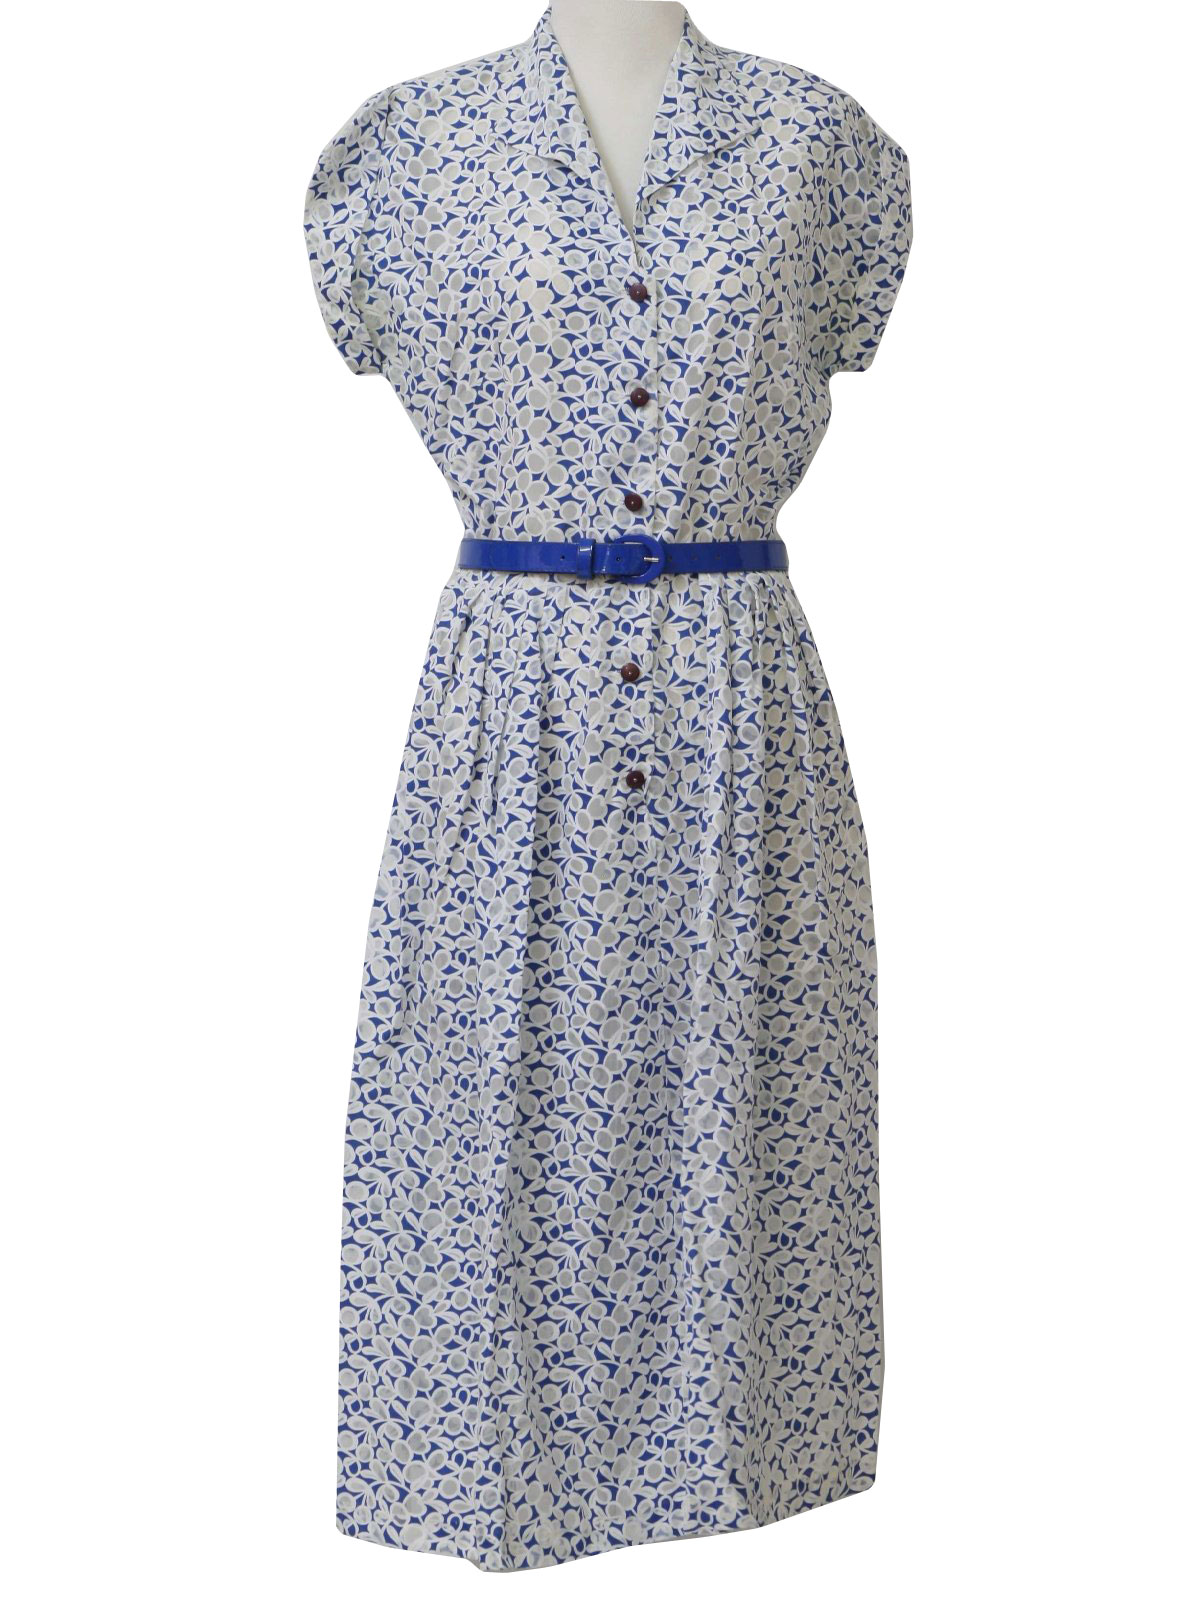 Vintage 1950's Dress: Early 50s -No Label- Womens whites and cobalt ...